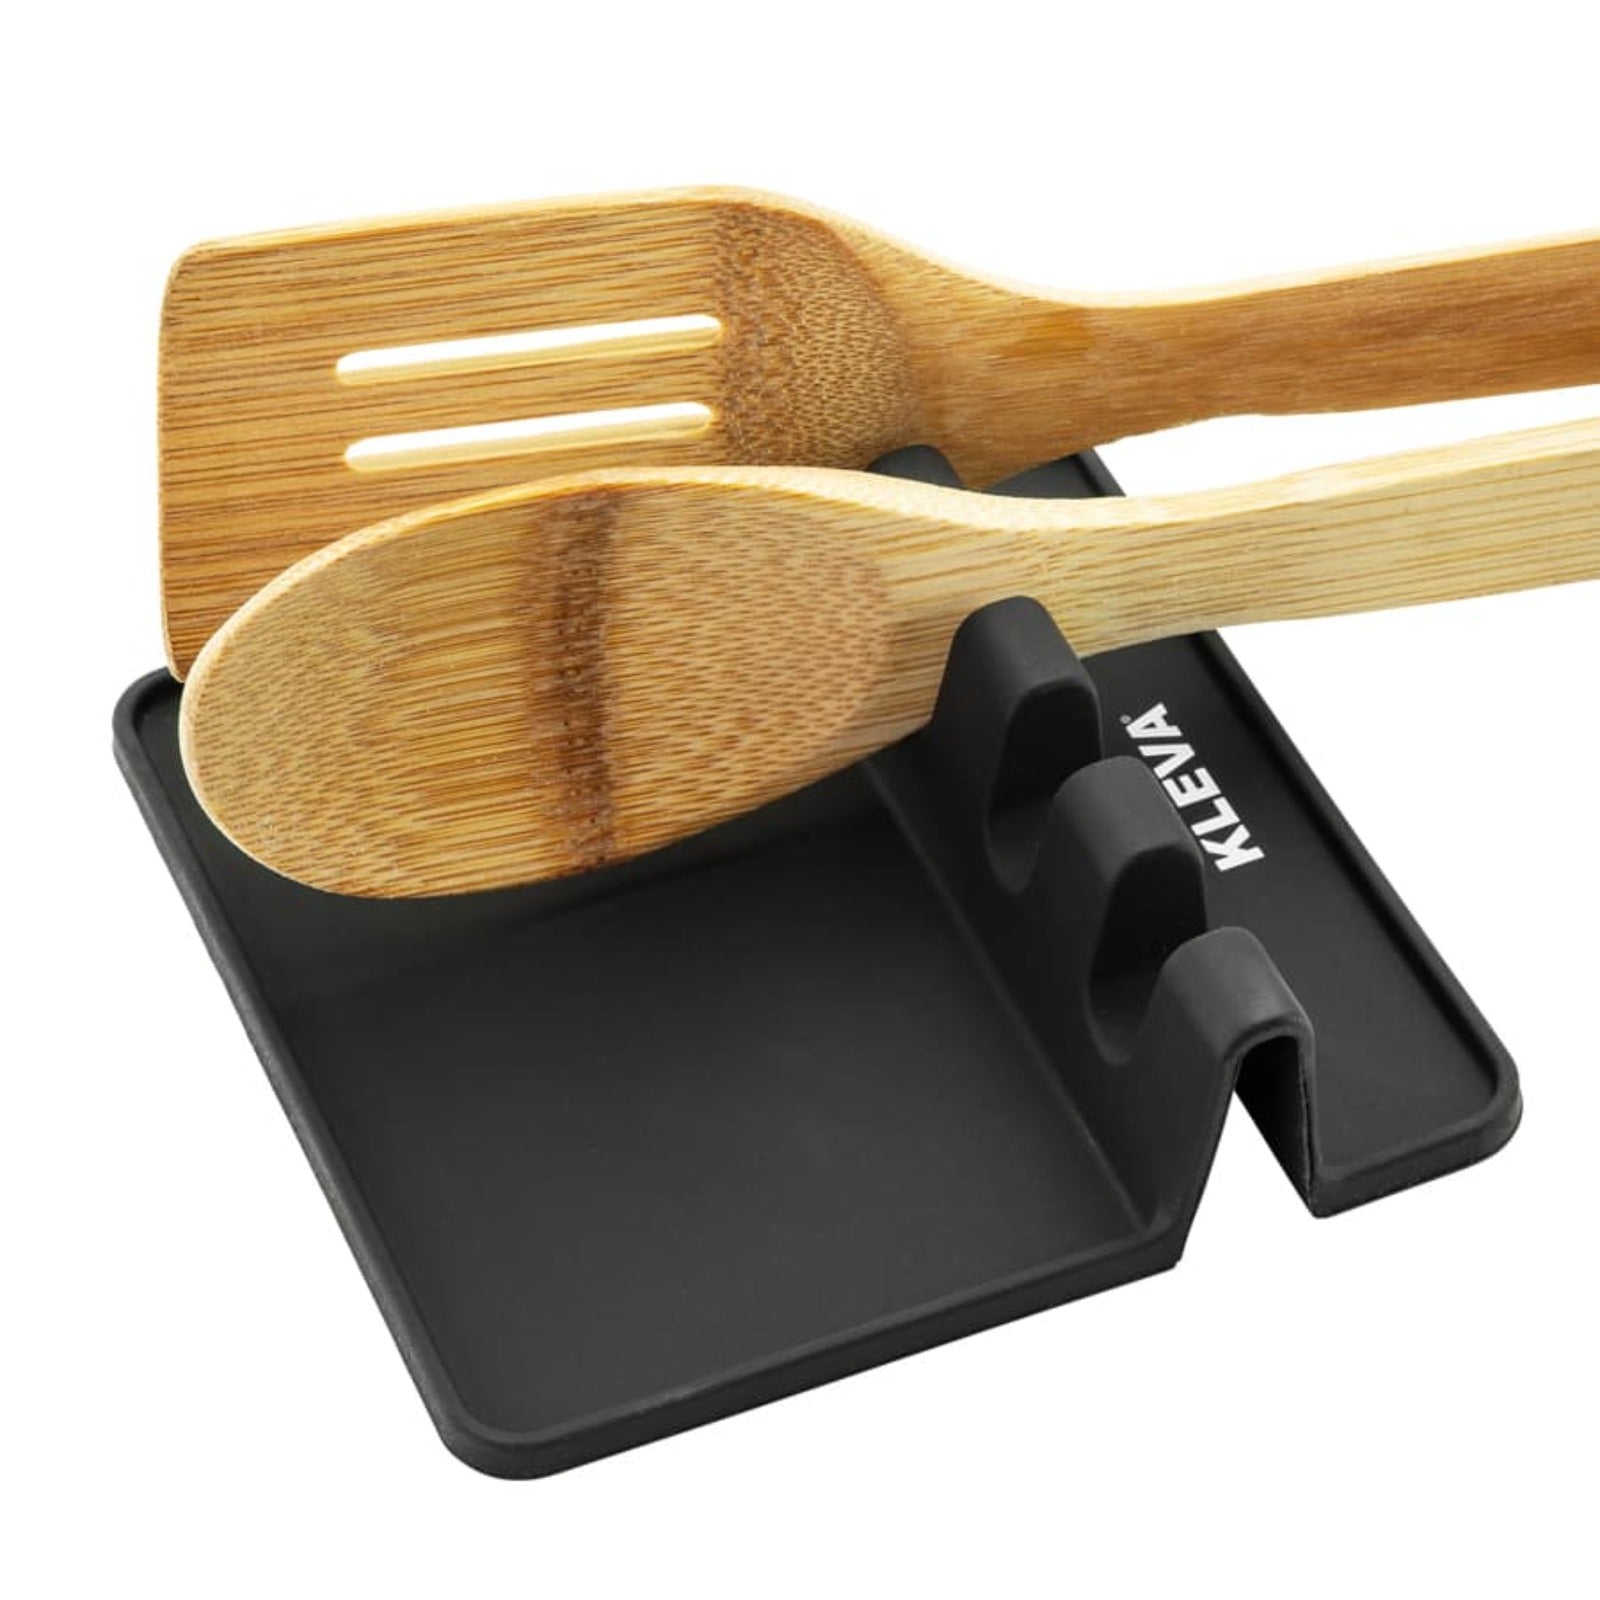 Kleva®  Silicone Utensils Rest - Keep Your Kitchen Bench Top Mess Free!  Bunnings Marketplace   